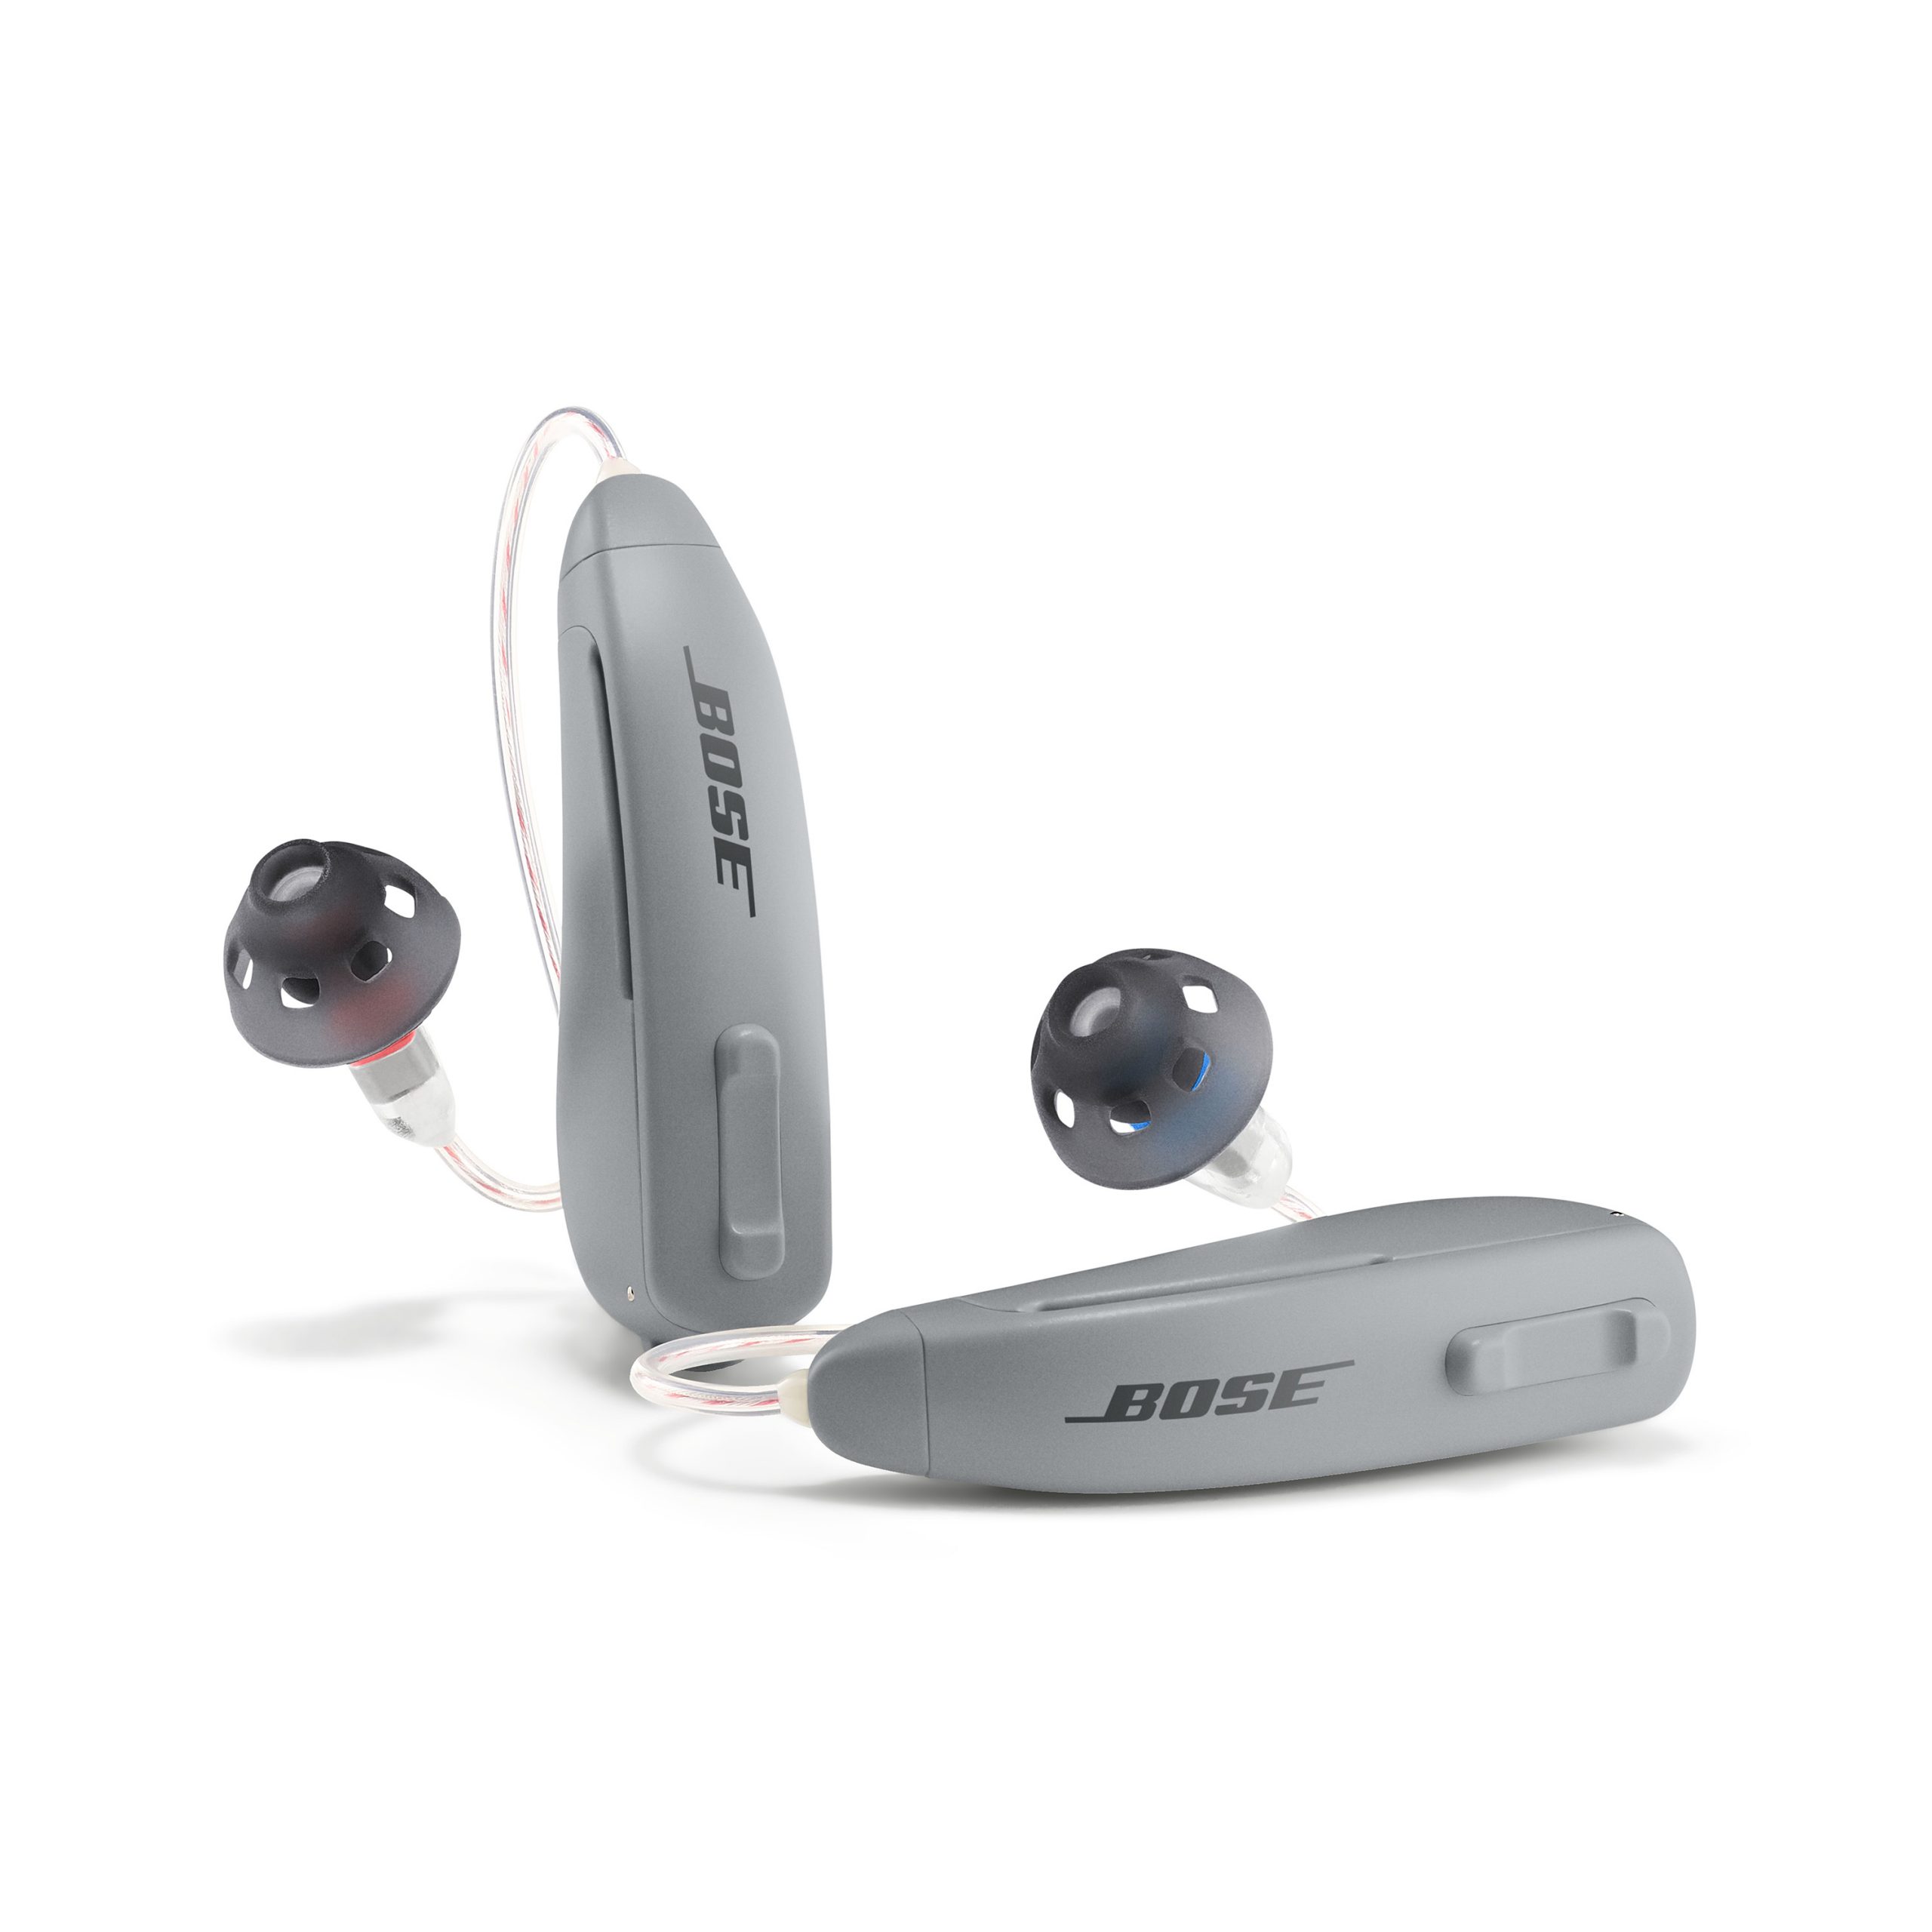 Bose launches direct-to-consumer sound control hearing aid